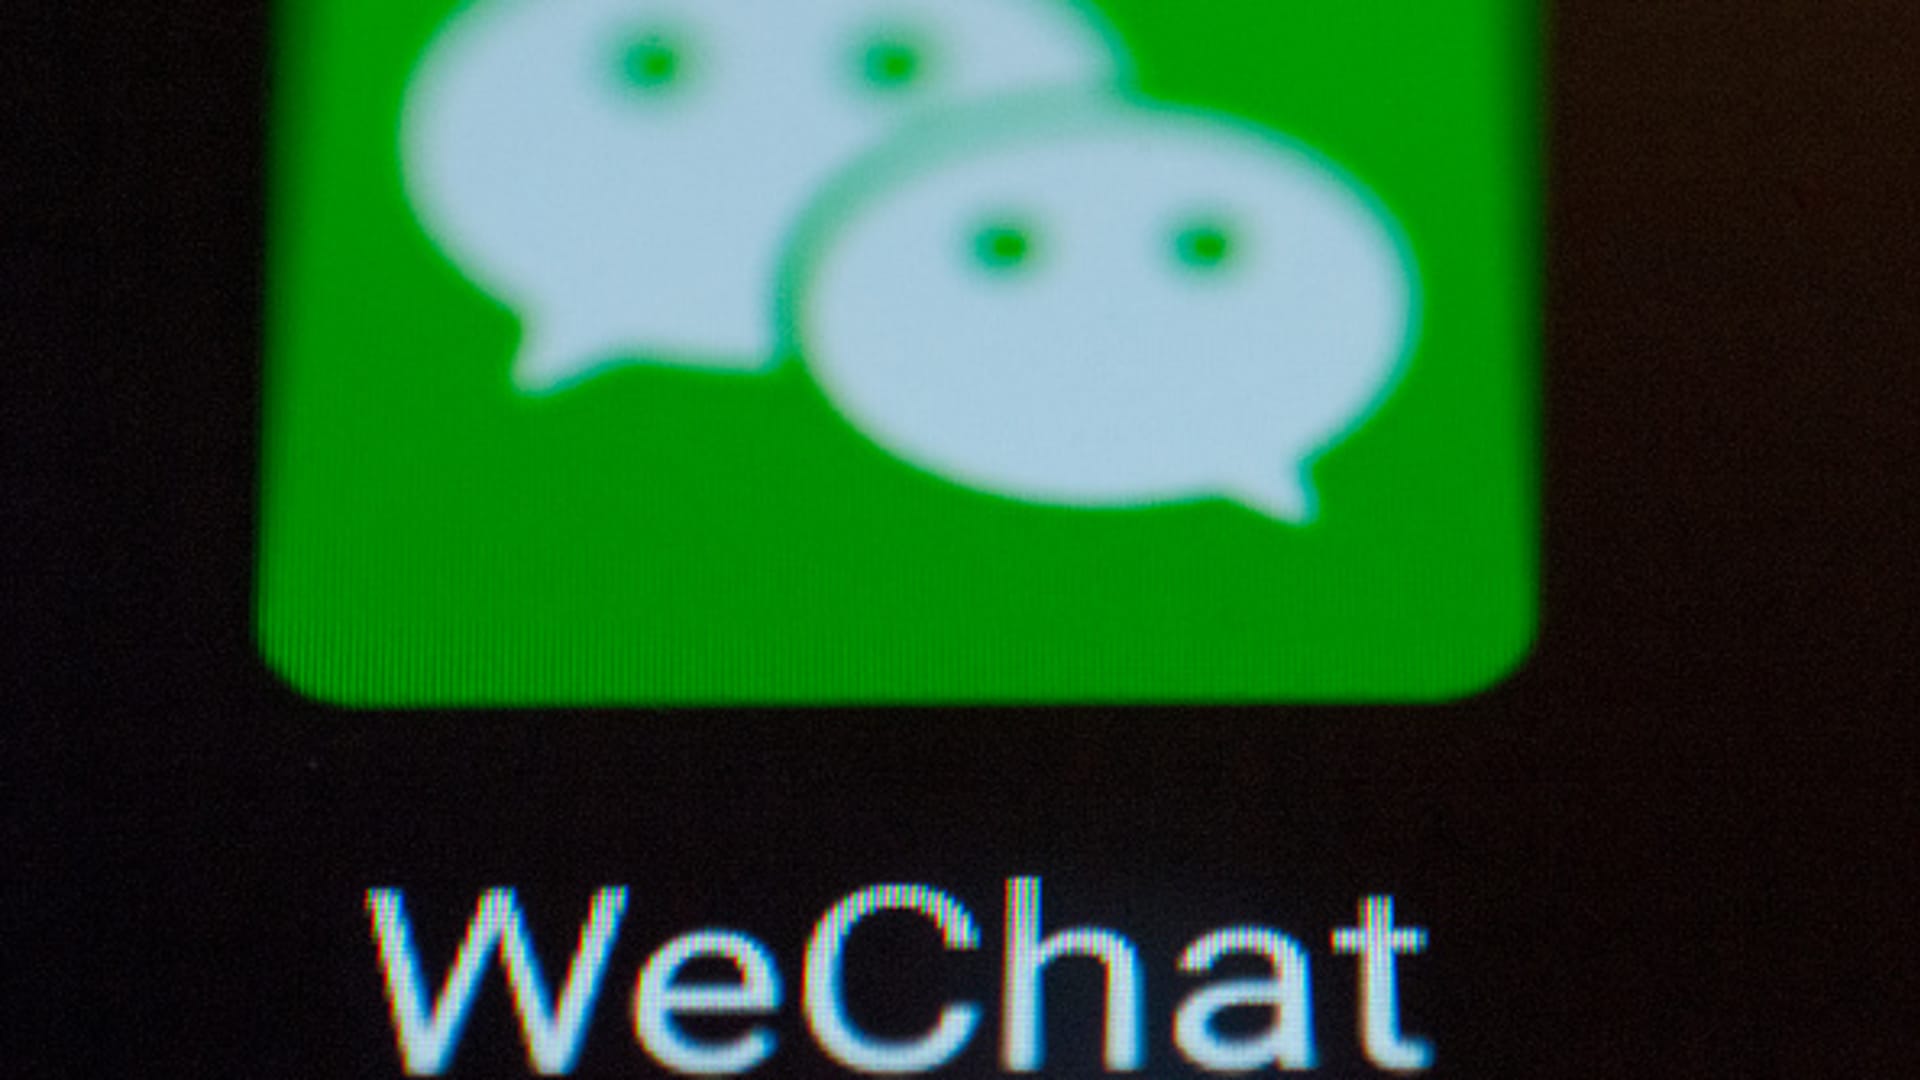 What is WeChat? Explaining China's largest messaging app by Tencent